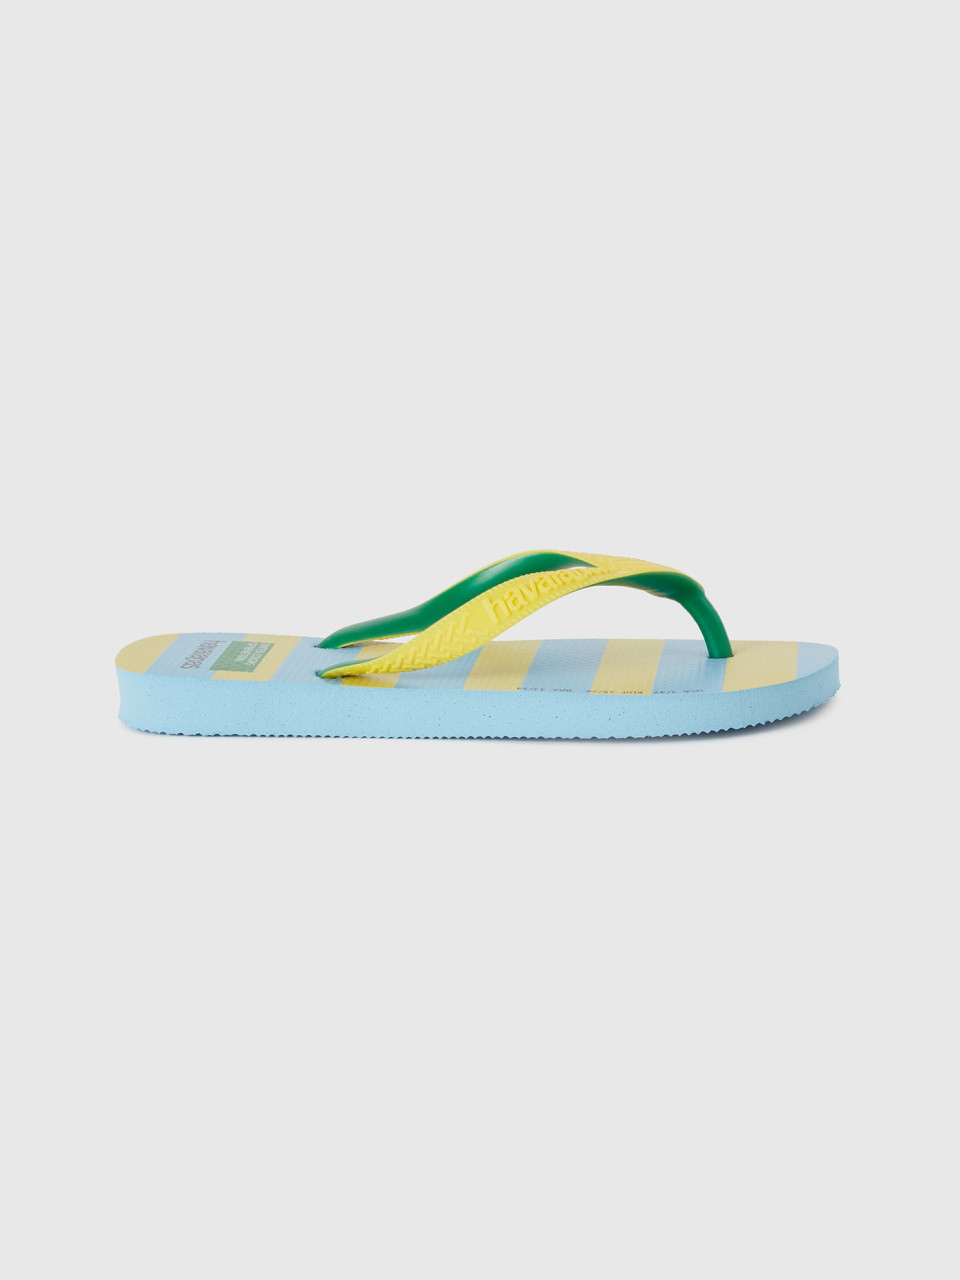 Benetton, Havaianas Flip Flops With Yellow And Light Blue Stripes, Multi-color, Kids